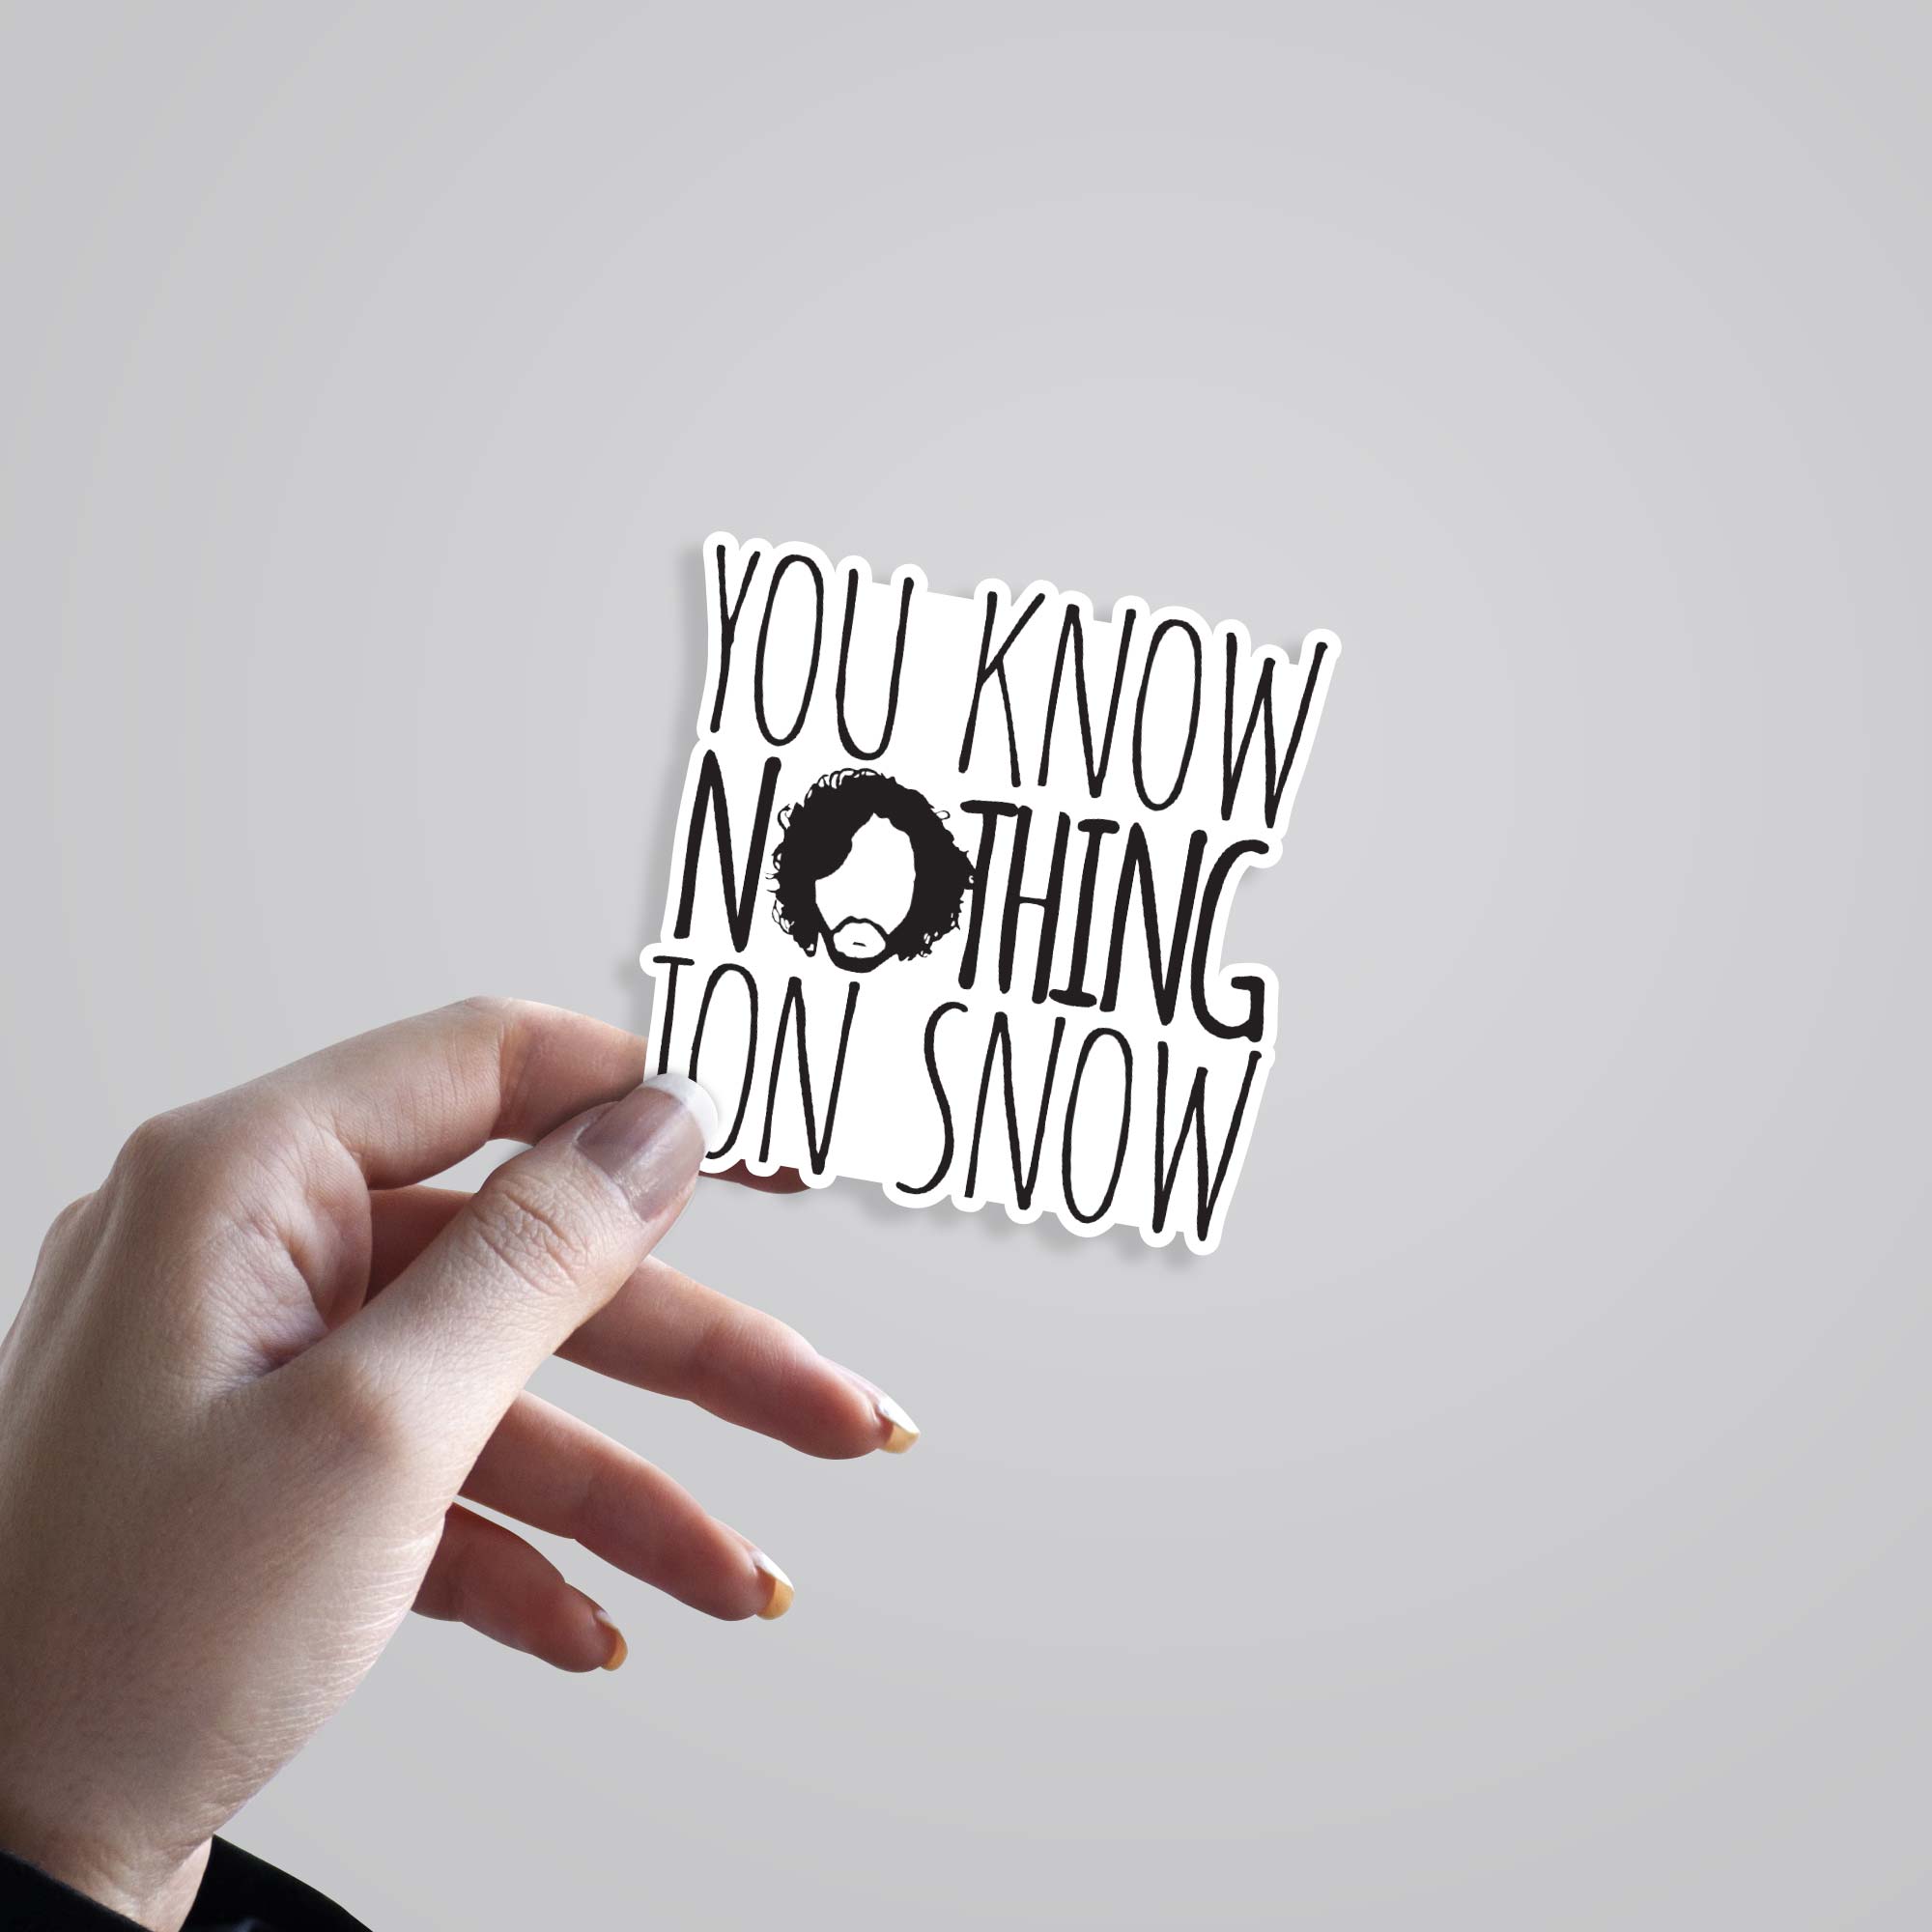 You Know Nothing Jon Snow TV Shows Stickers